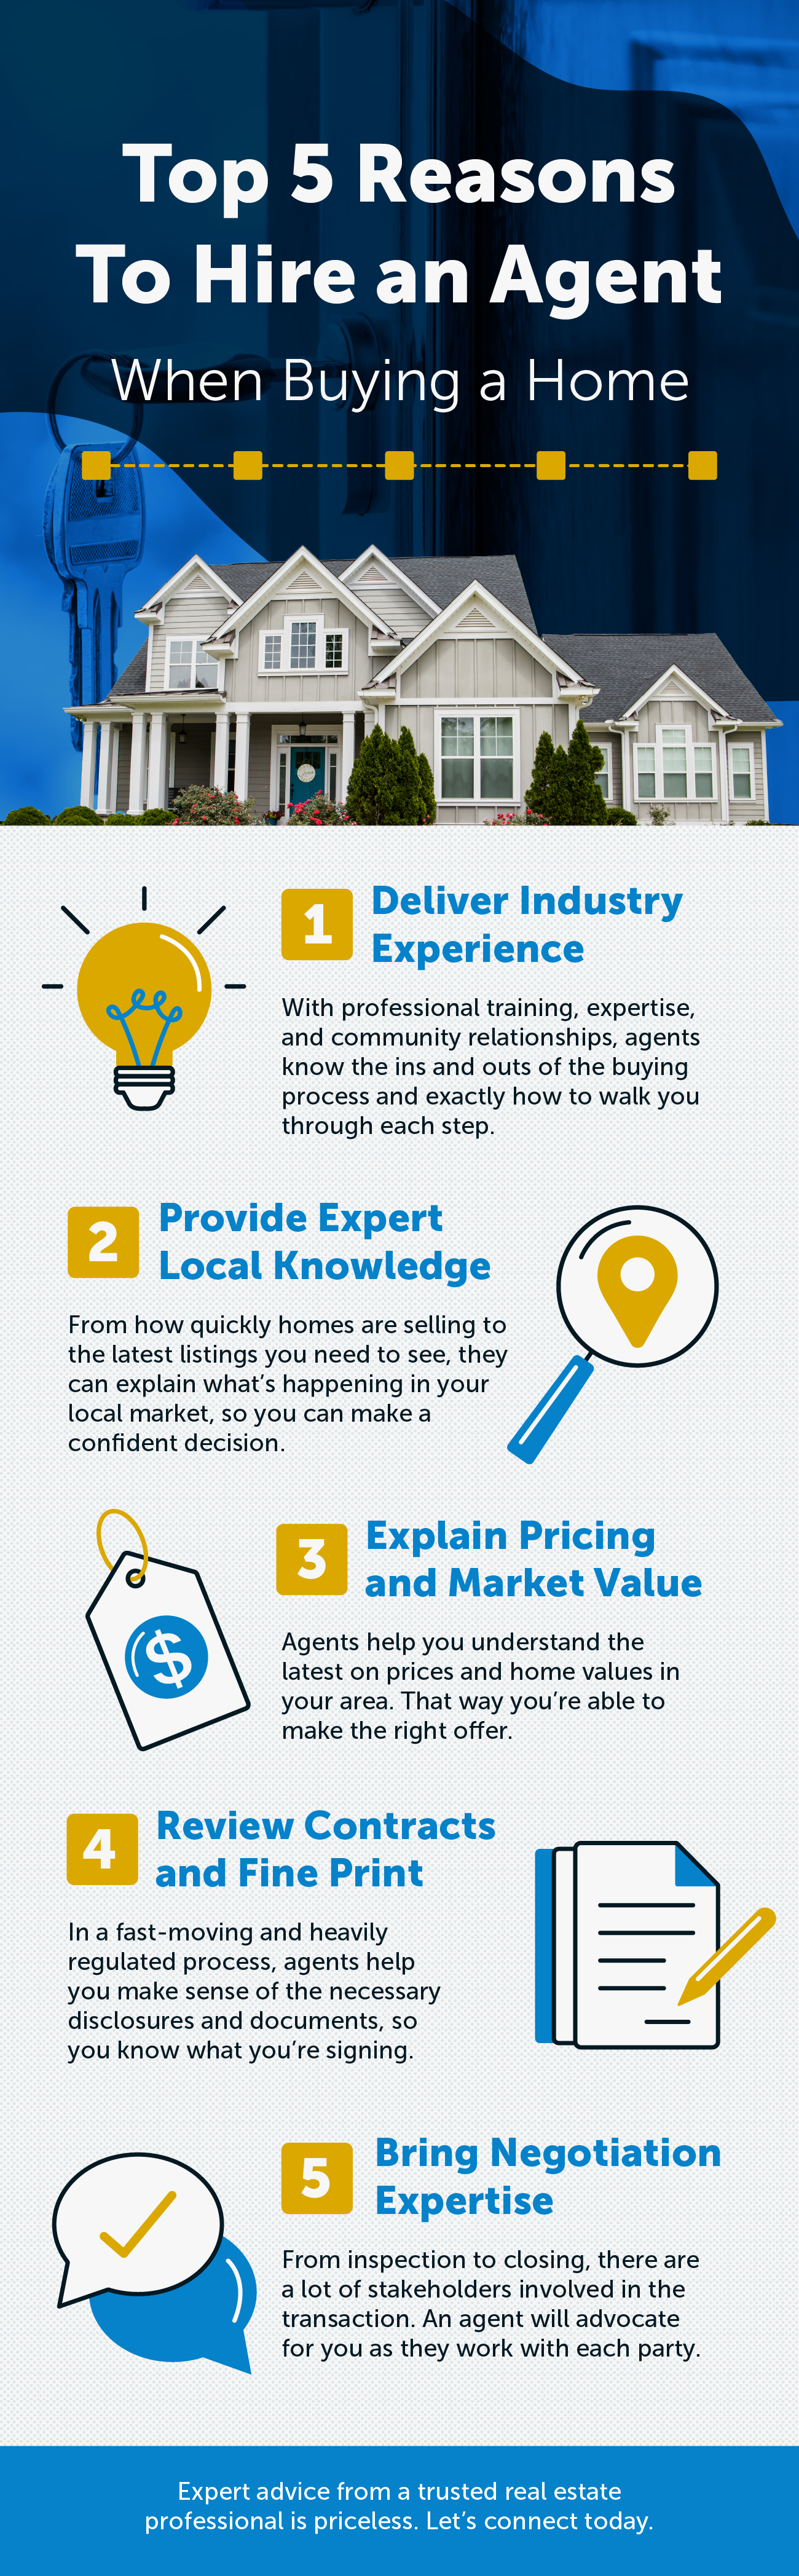 Top 5 Reasons To Hire an Agent When Buying a Home [INFOGRAPHIC]